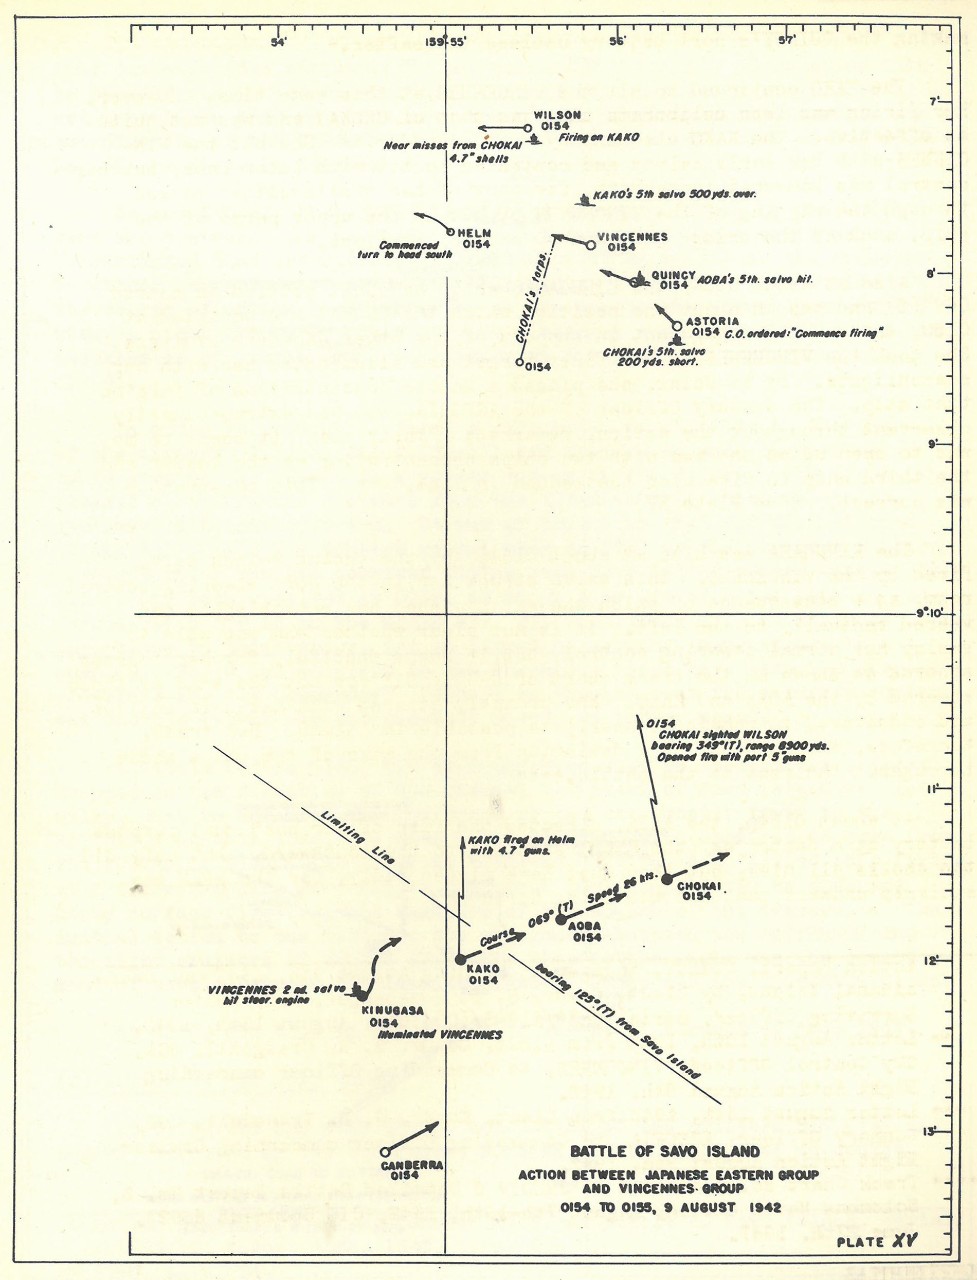 Plate 15: Battle of Savo Island, Action Between Japanese Eastern Group and Vincennes Group, 0154 to 0155, 9 August 1942 - chart - The Battle of Savo Island August 9, 1942 Strategical and Tactical Analysis